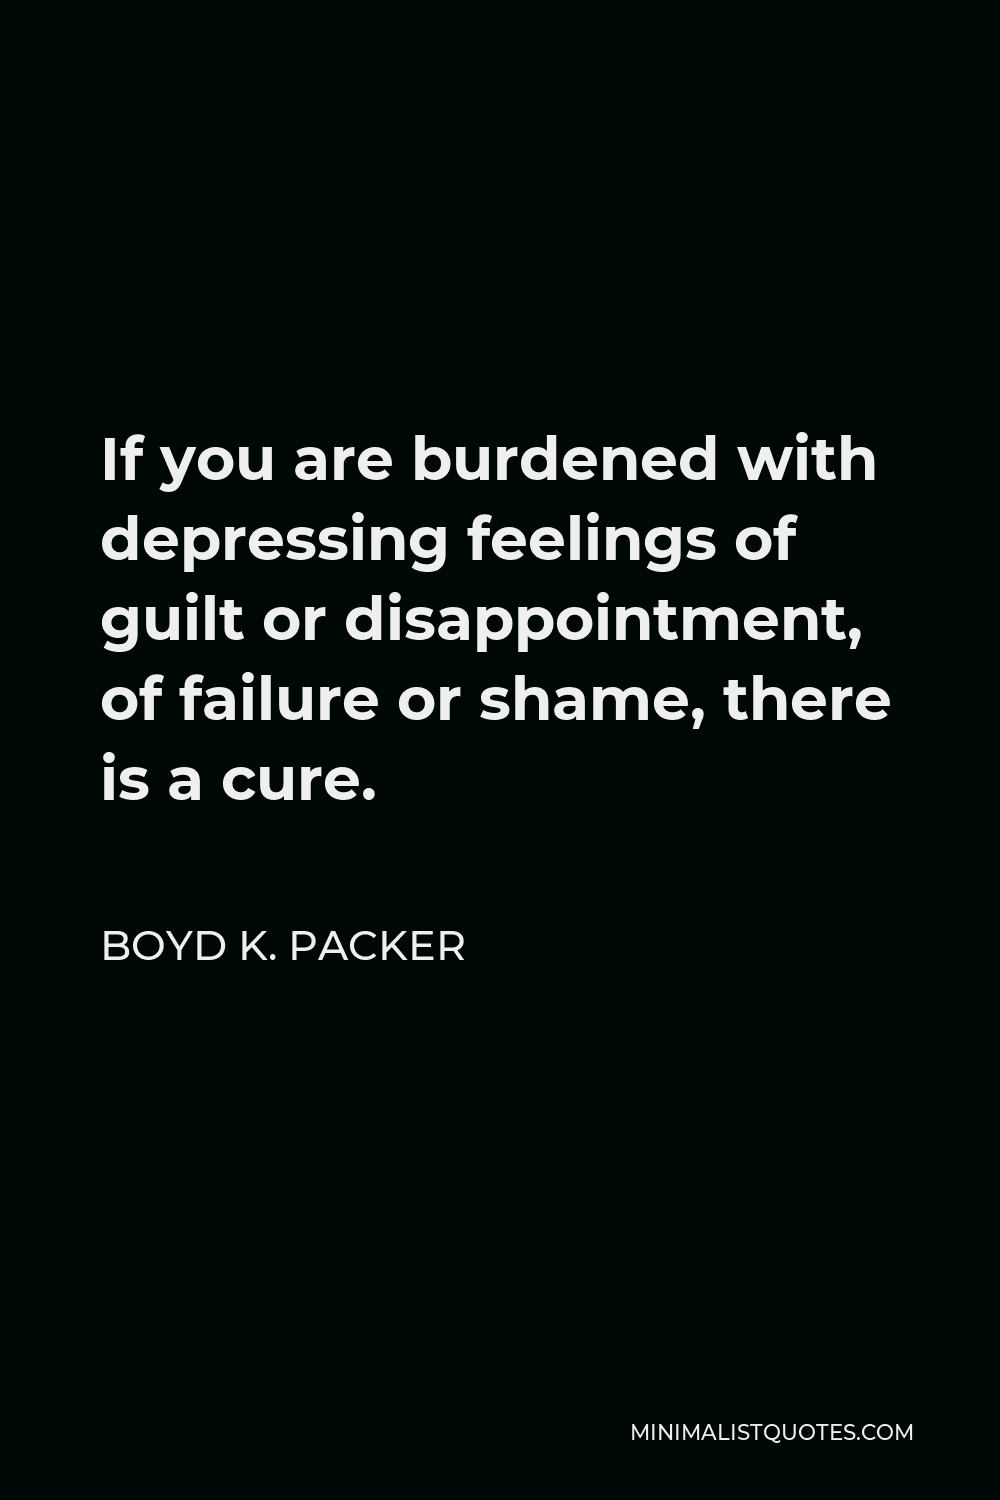 Boyd K. Packer Quote - If you are burdened with depressing feelings of guilt or disappointment, of failure or shame, there is a cure.